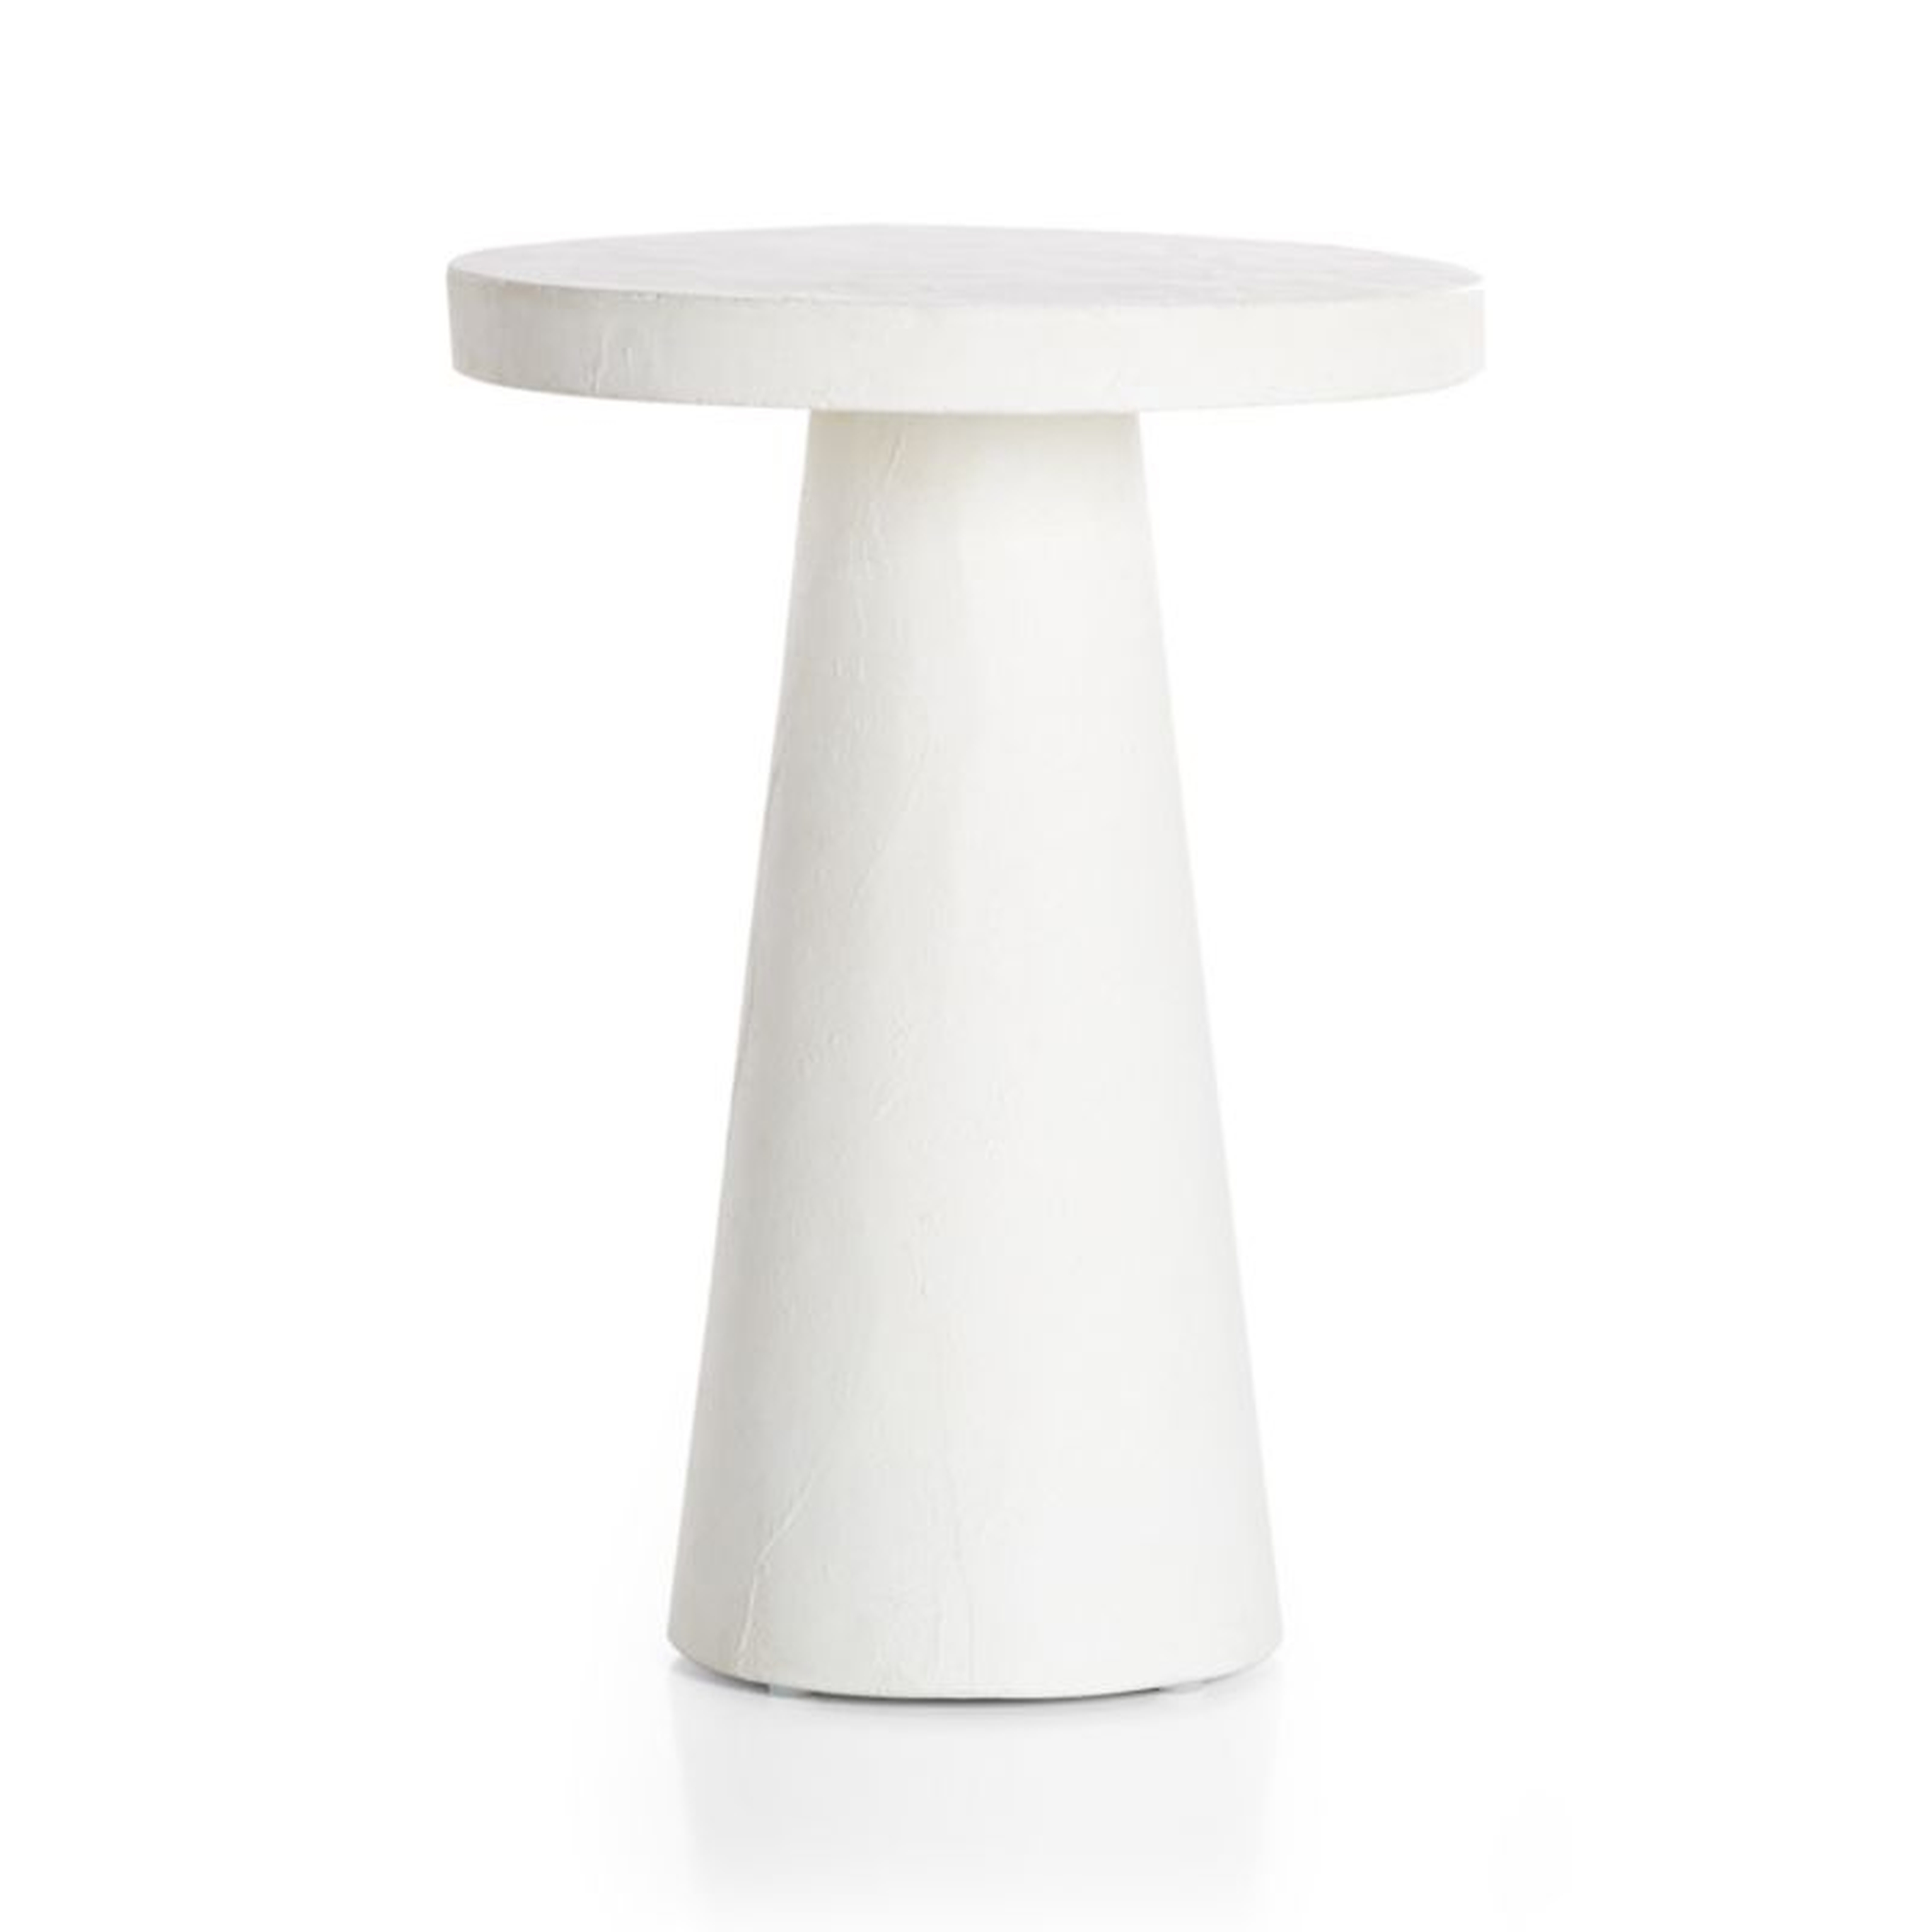 Willy White Plaster Round Pedestal Side Table by Leanne Ford - Crate and Barrel